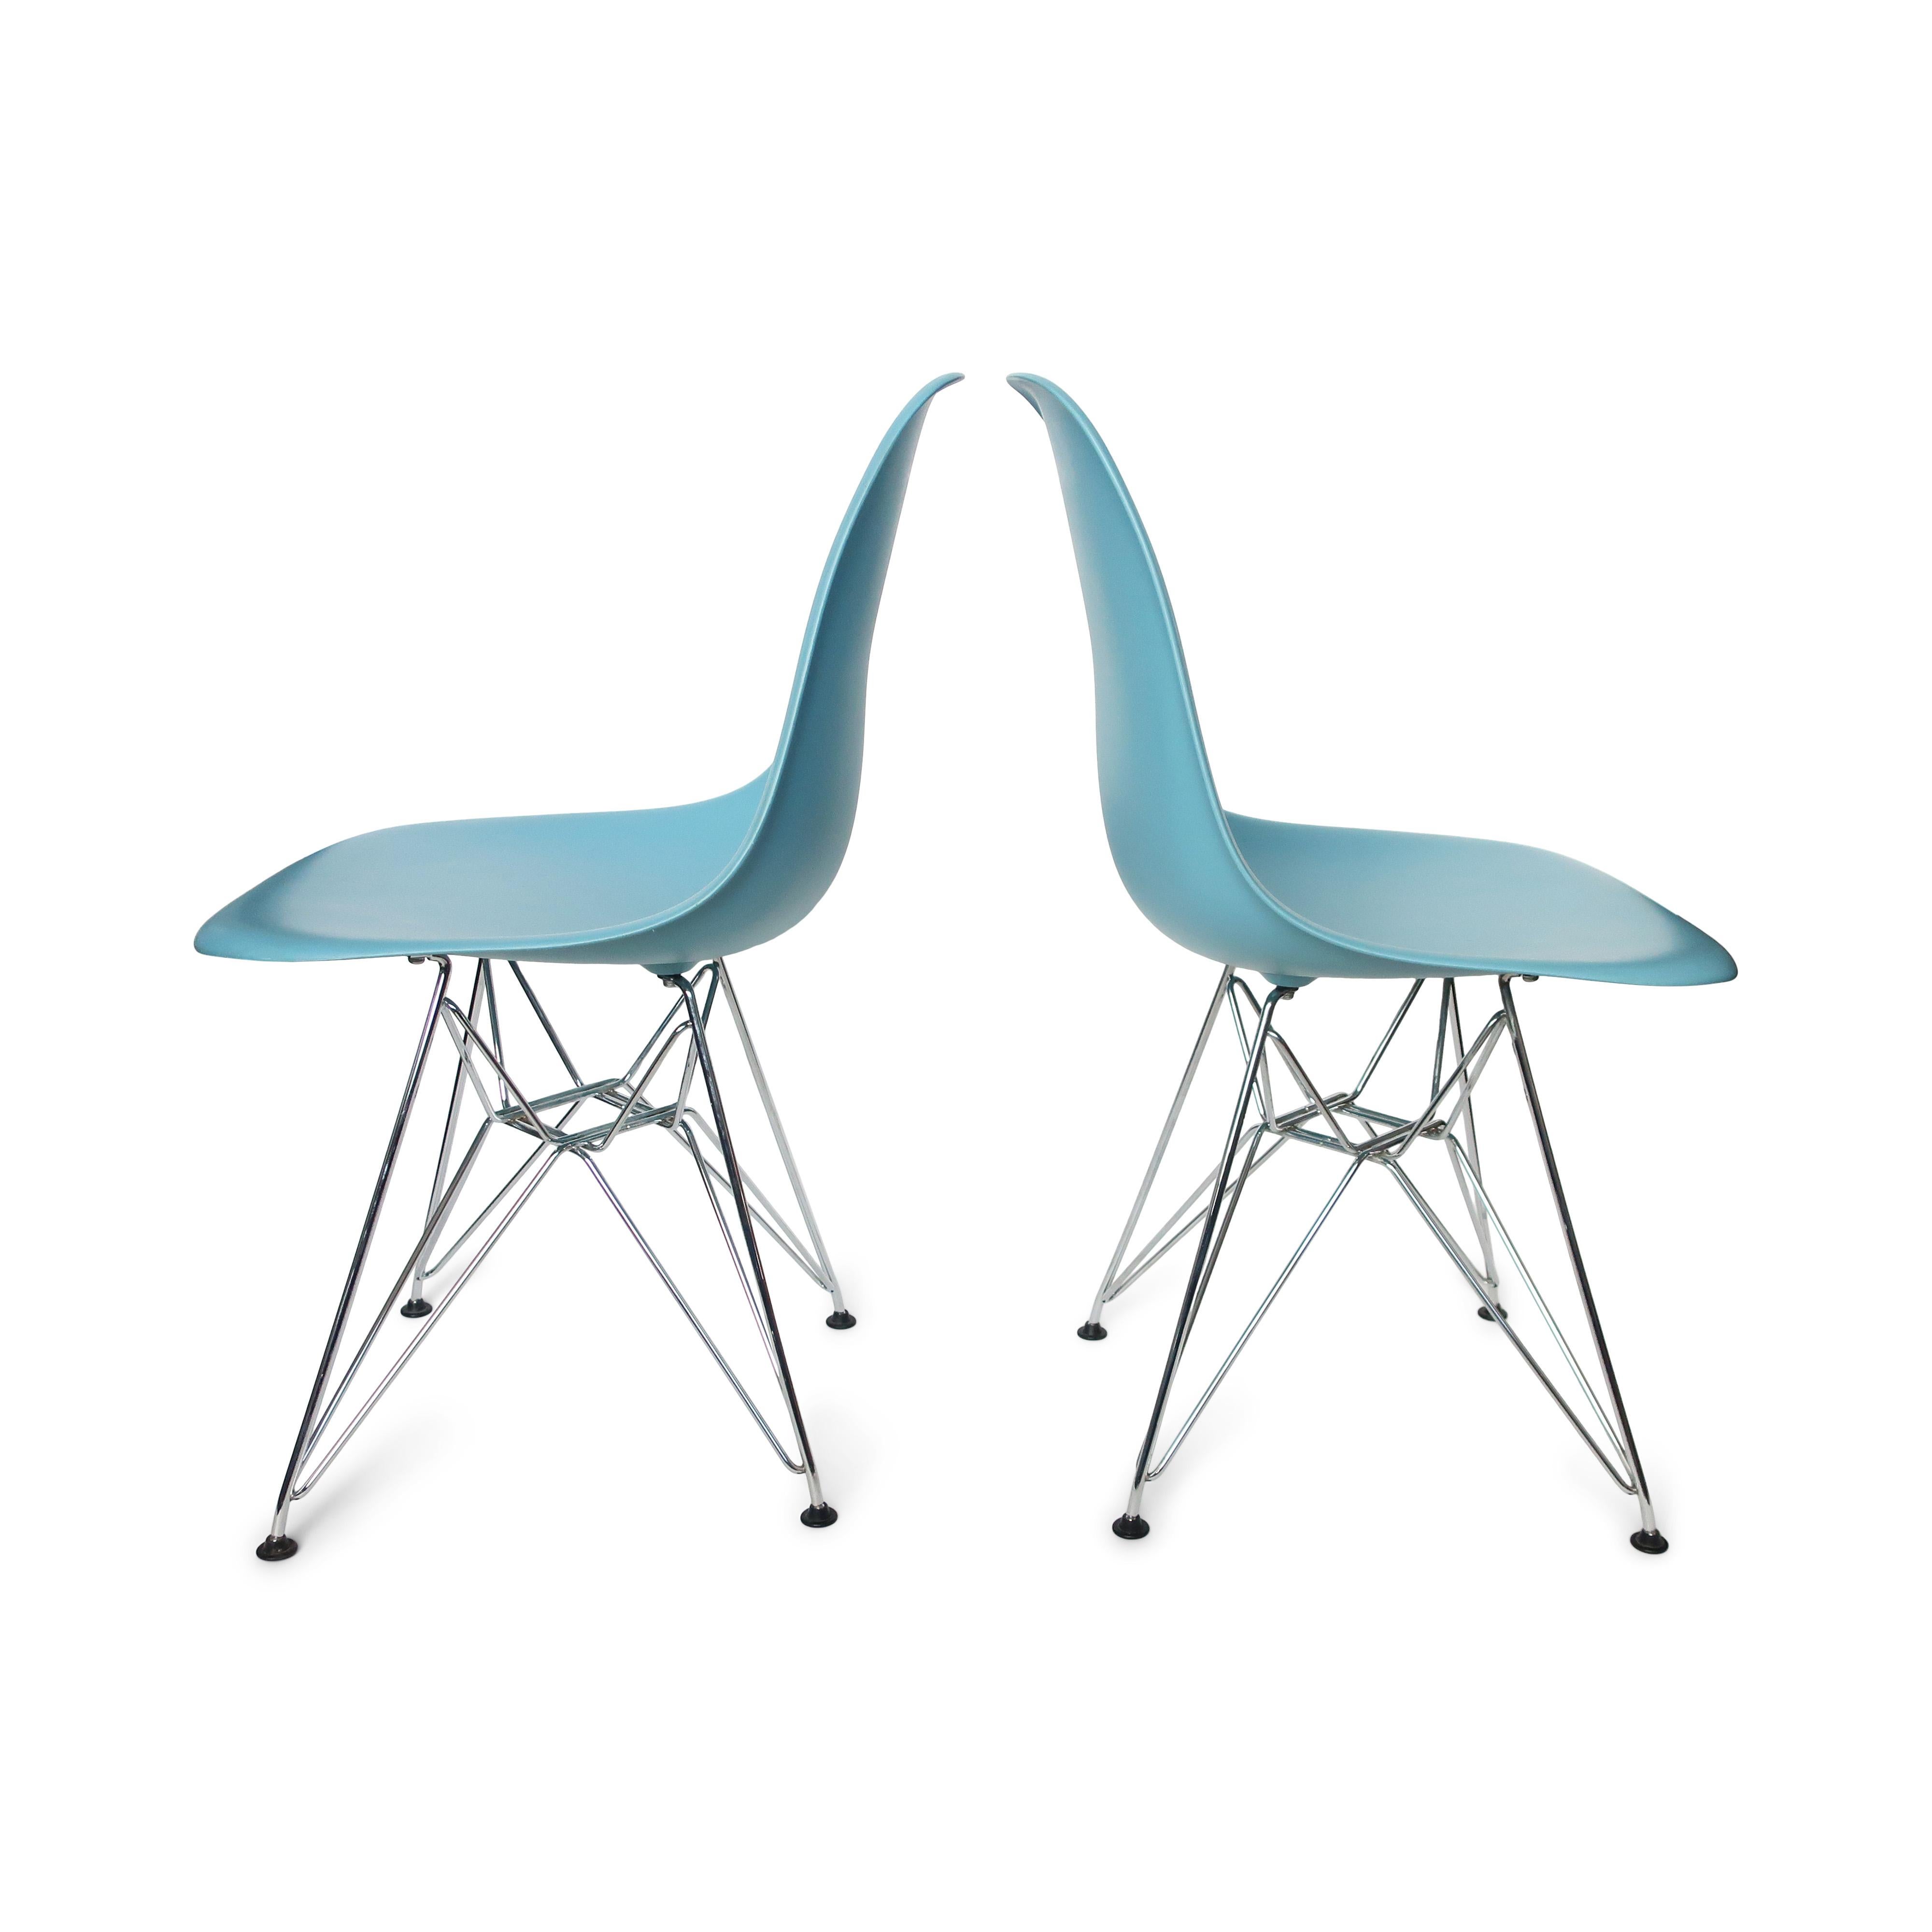 A classic pair of dining chairs designed by Ray and Charles Eames for Herman Miller. This pair was produced as part of a license agreement with Vitra. Shells are light blue with chrome Eiffel Tower bases. 

In very good vintage condition with wear